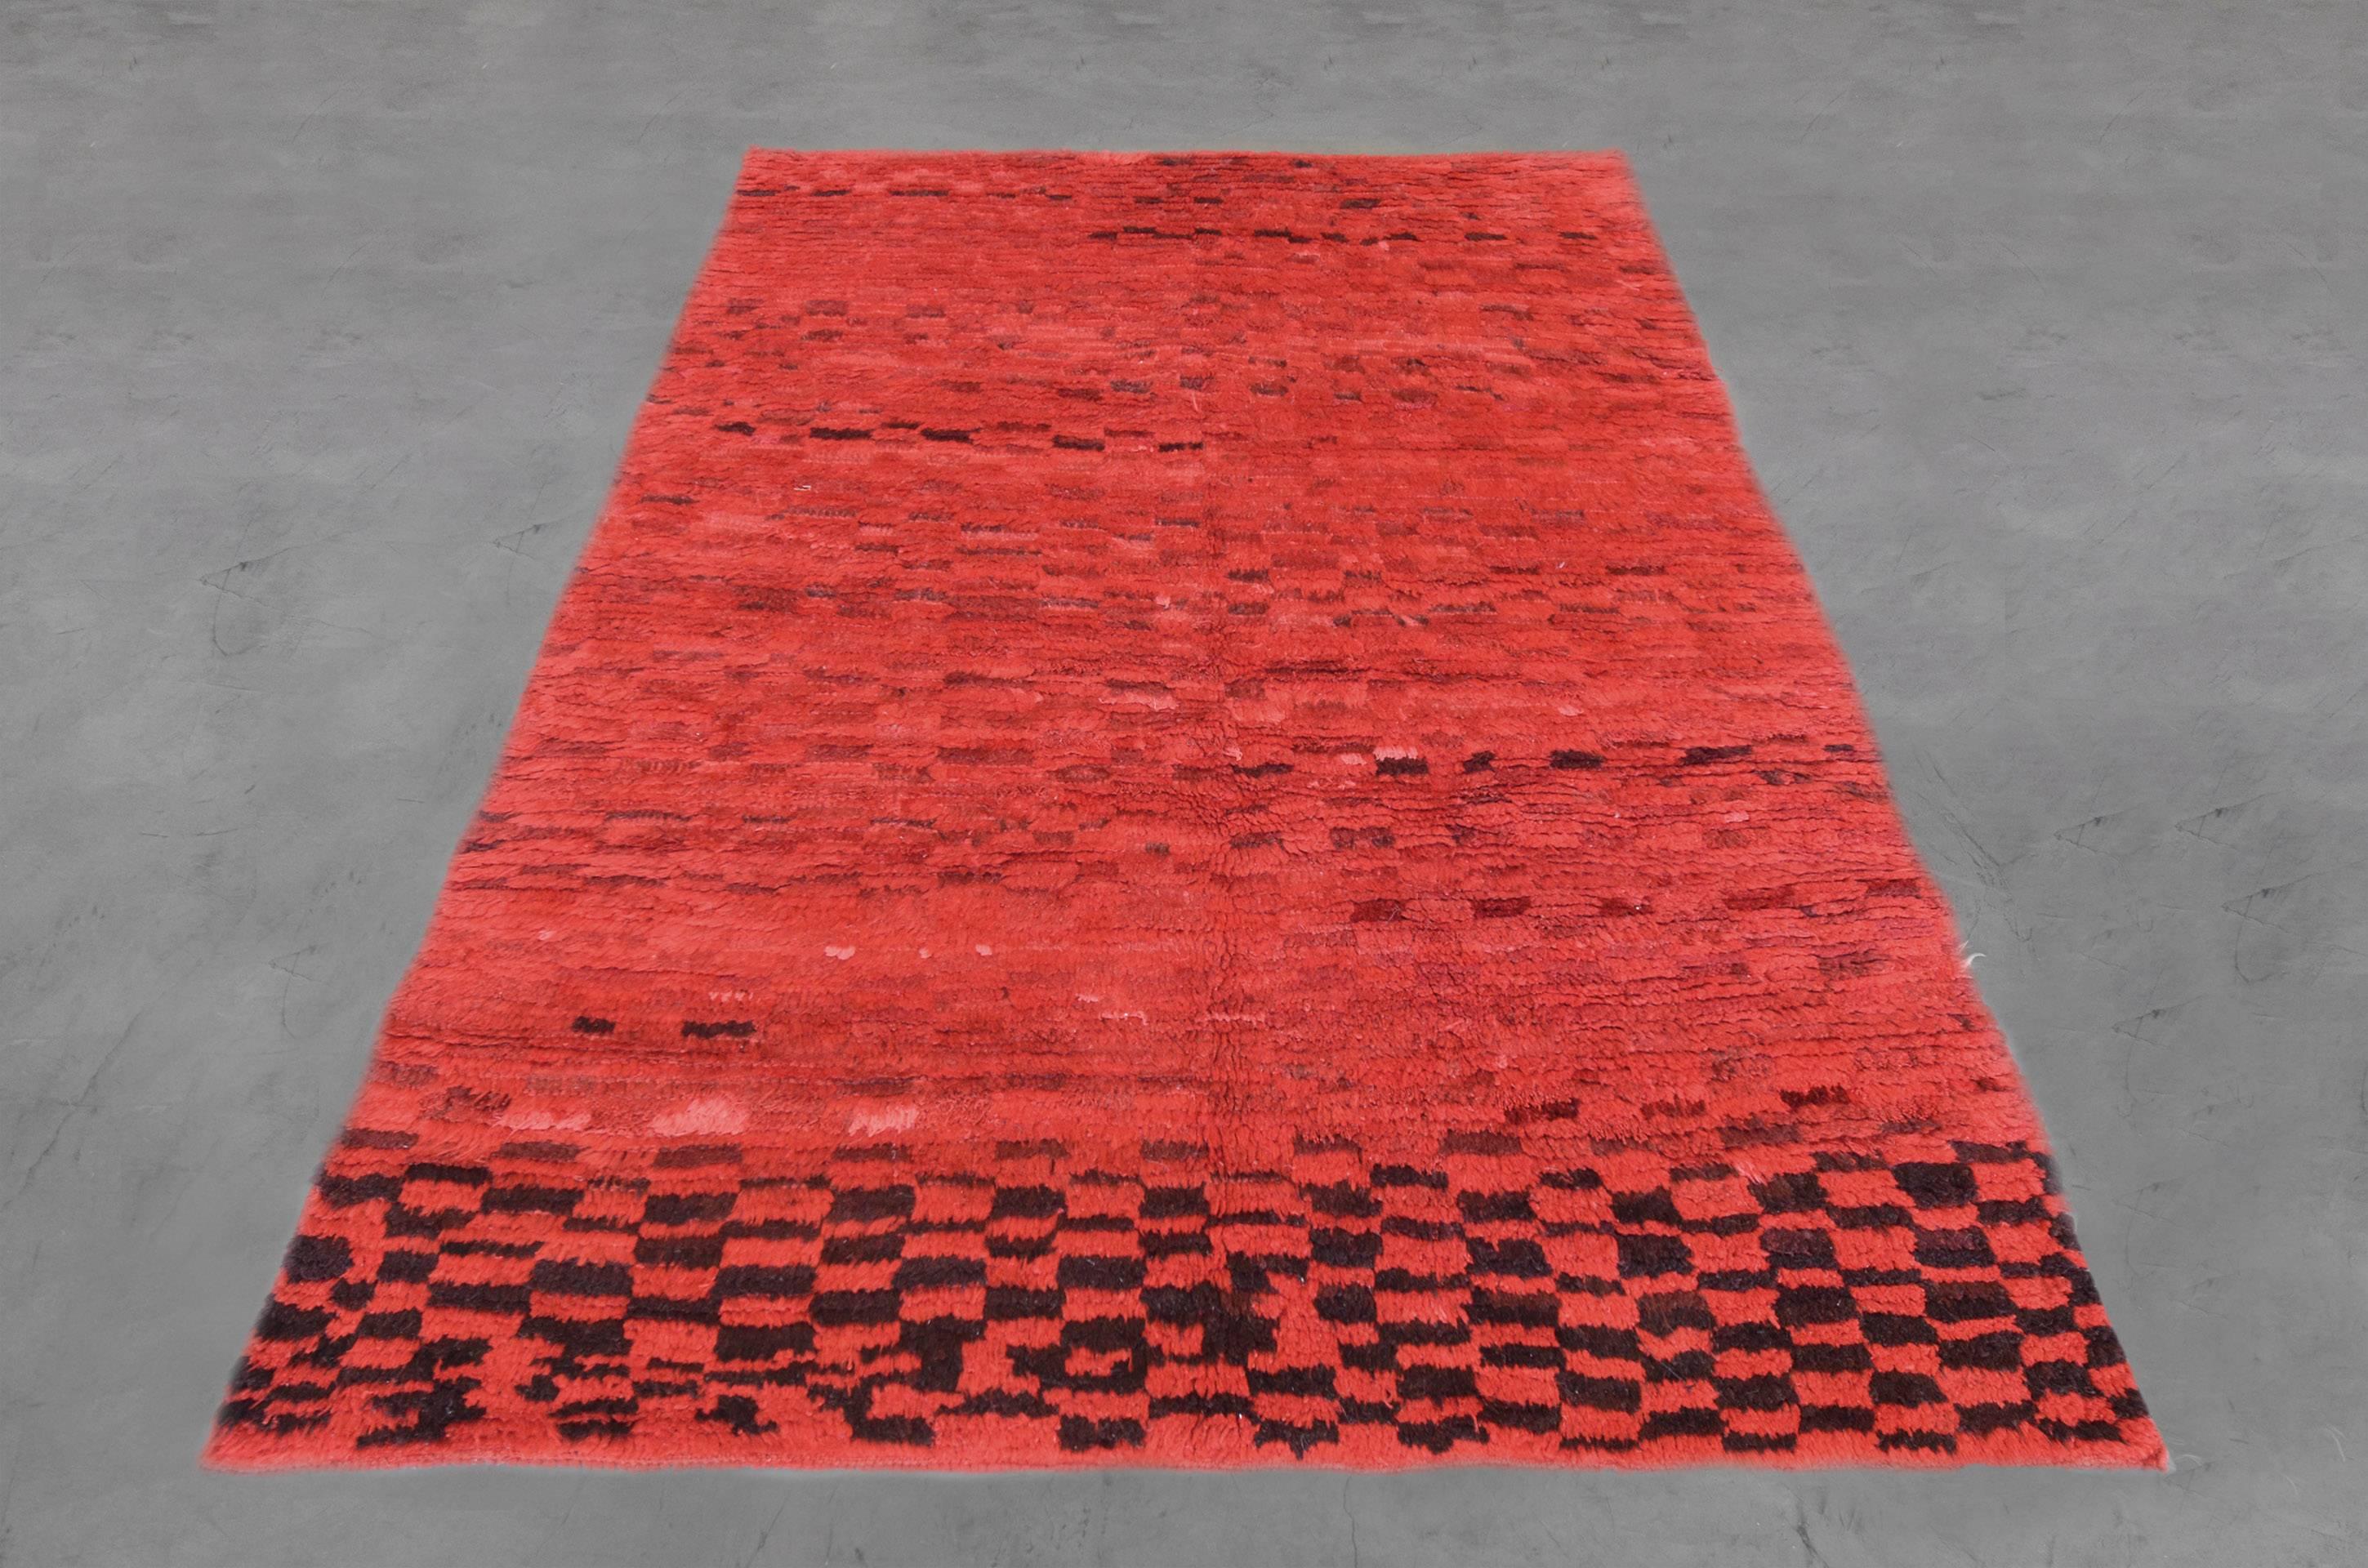 This one of a kind vintage Moroccan rug has an intricately hand-knotted checkerboard pattern in deep maroon on a rich red field. Intermixed within the design of this late 20th century rug are beautifully braided details. Sized at 5’8” x 8’3” the